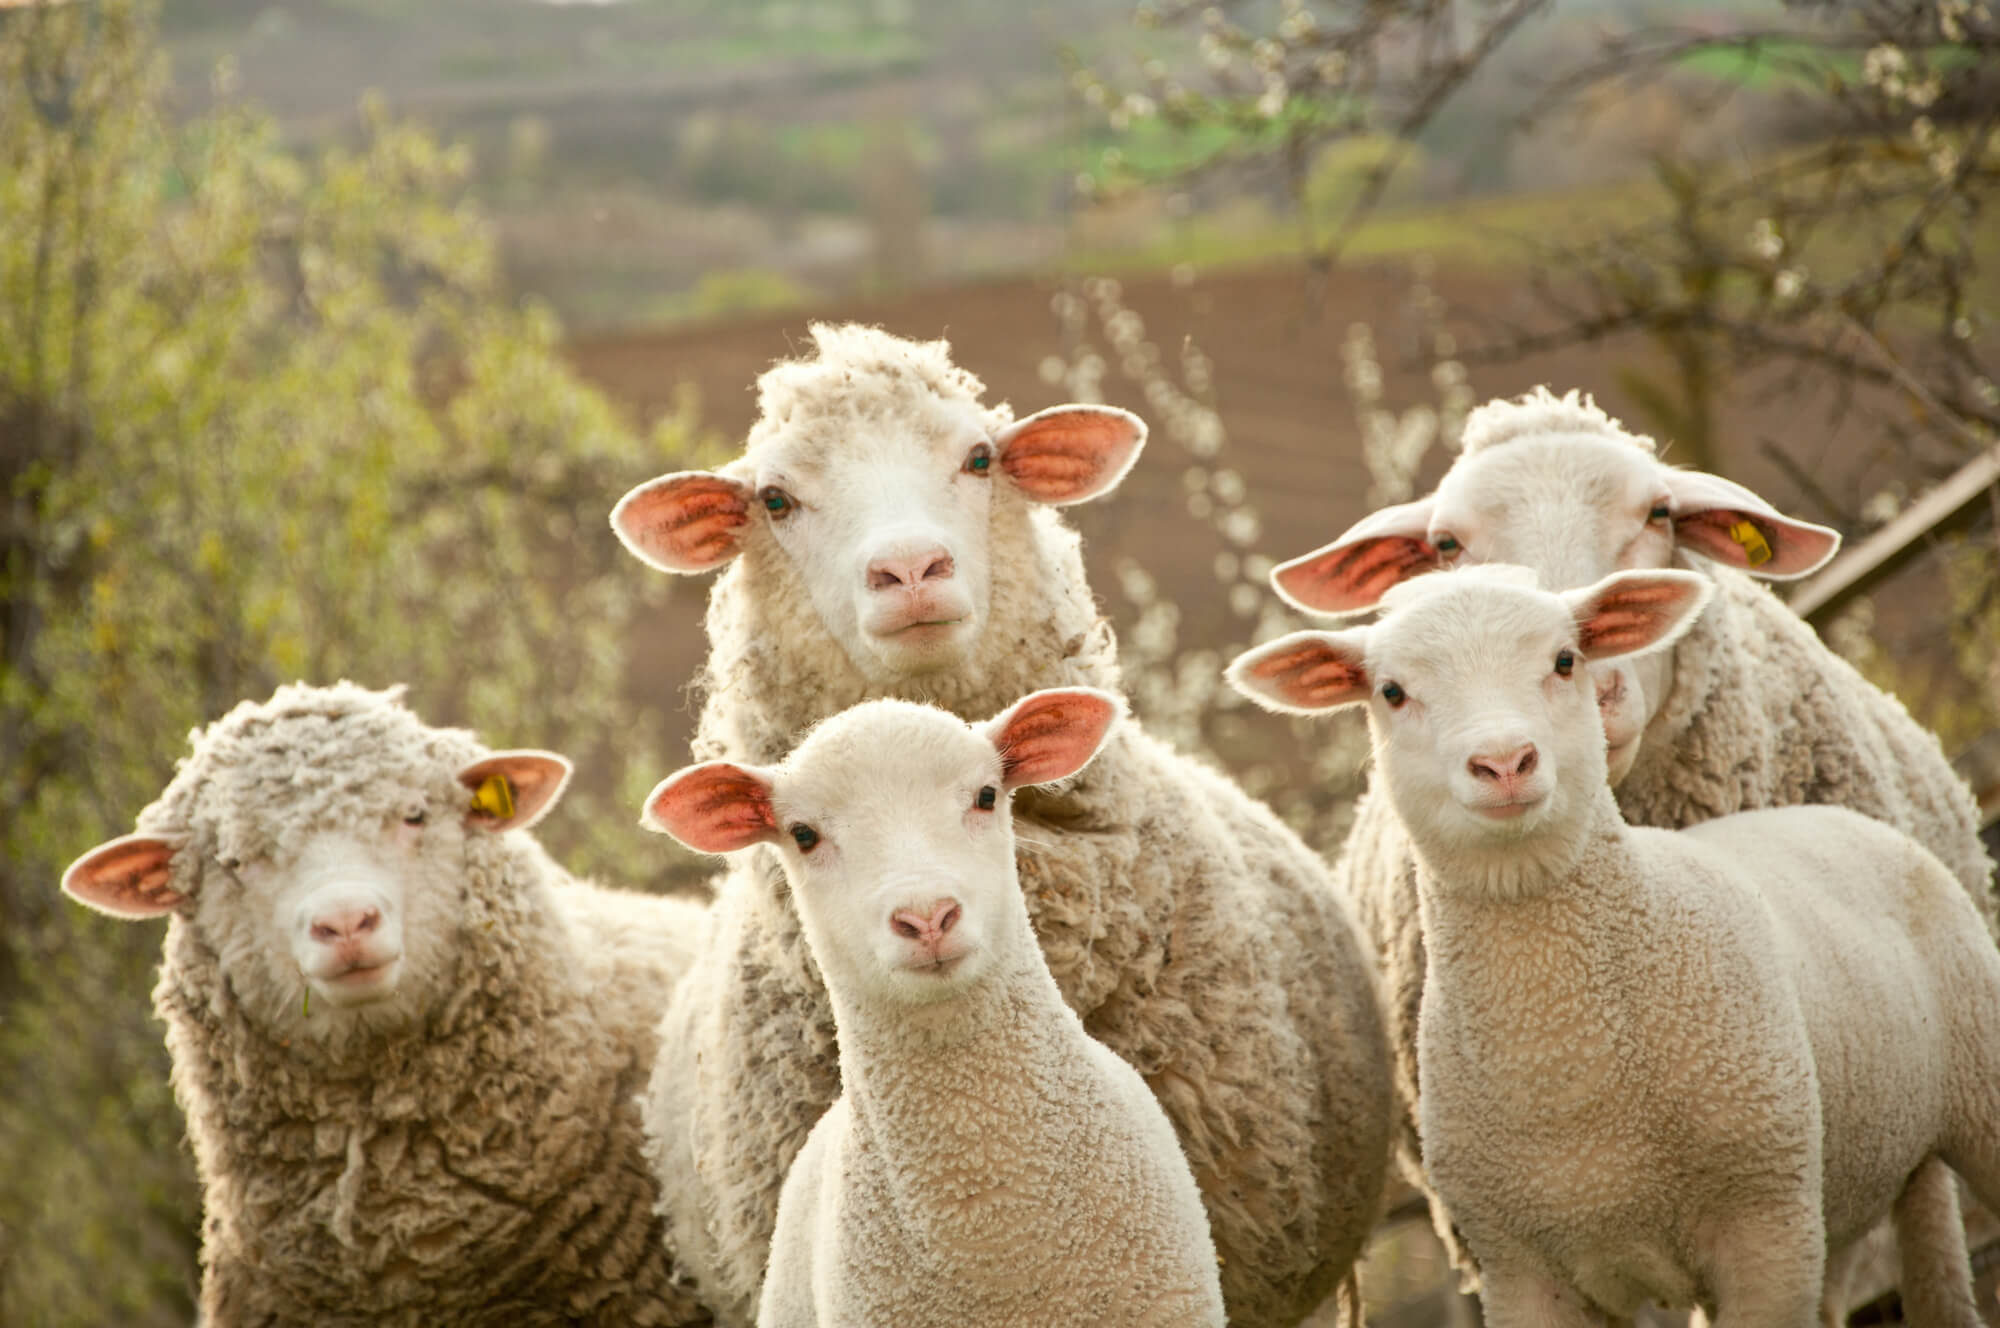 A small flock or sheep looking curious about animal health research in Australia